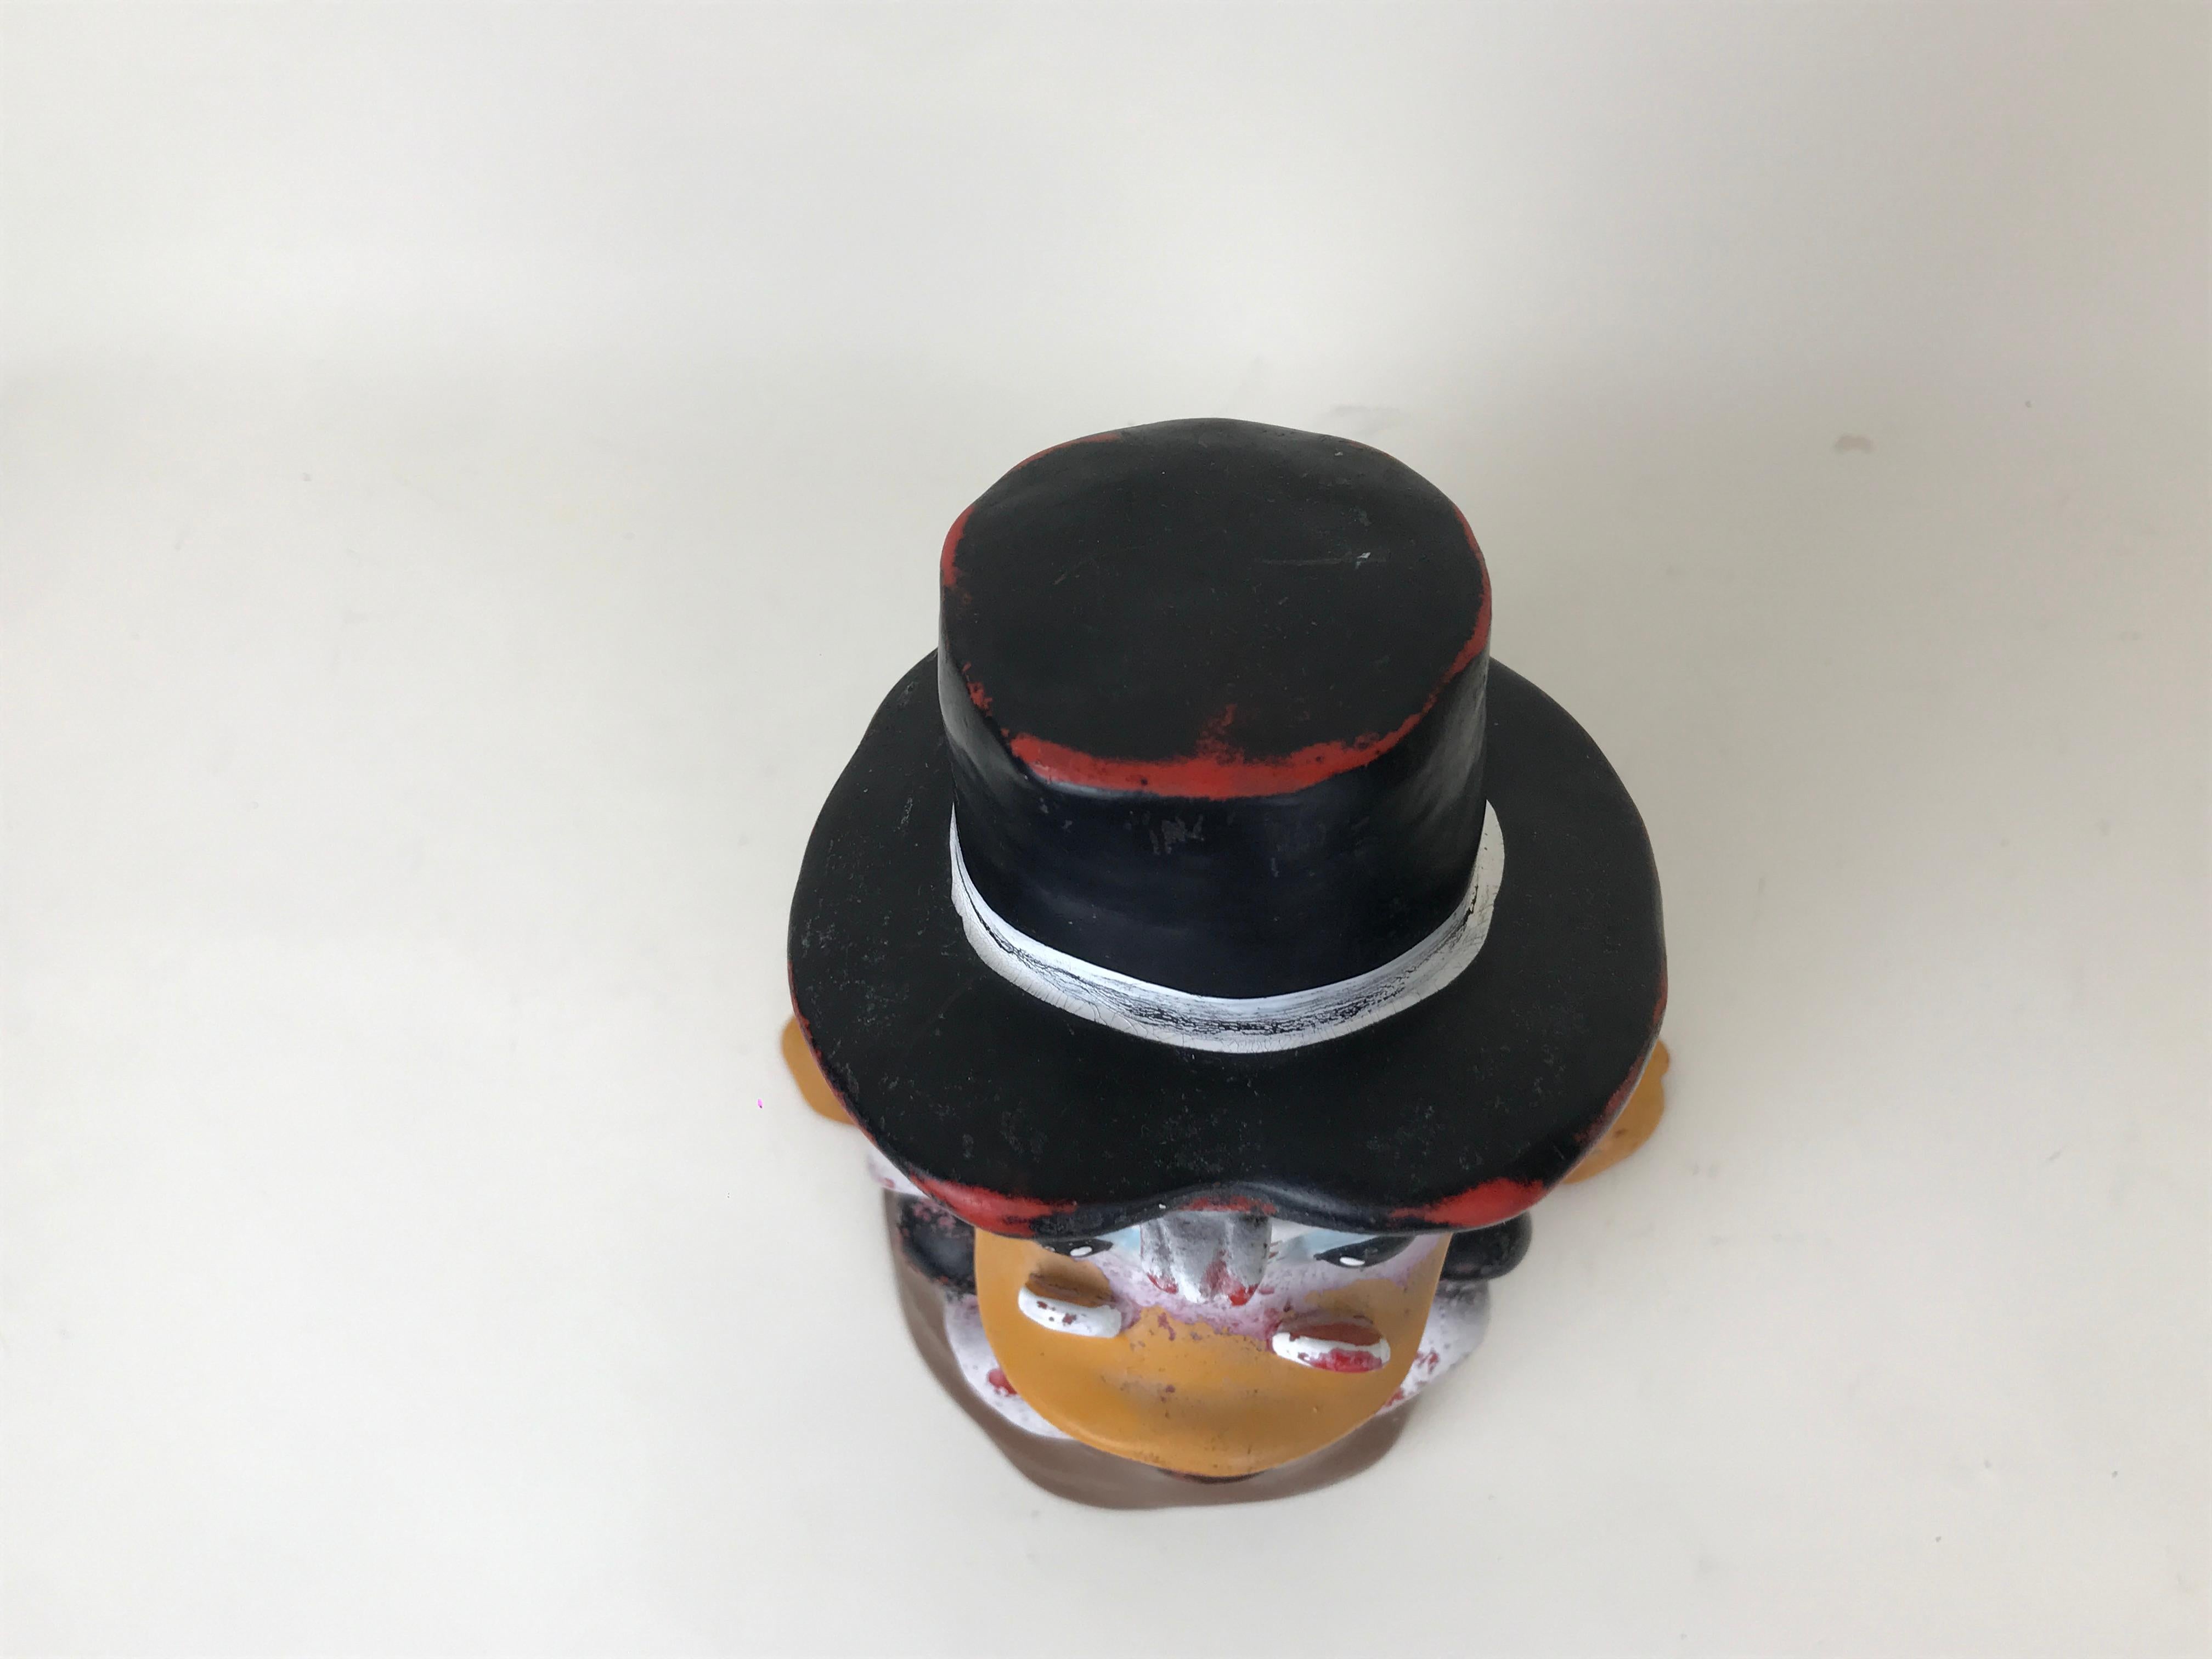 1990s Vintage Disney Uncle Scrooge Plastic Garden Scultpture by Celloplast In Good Condition For Sale In Milan, IT